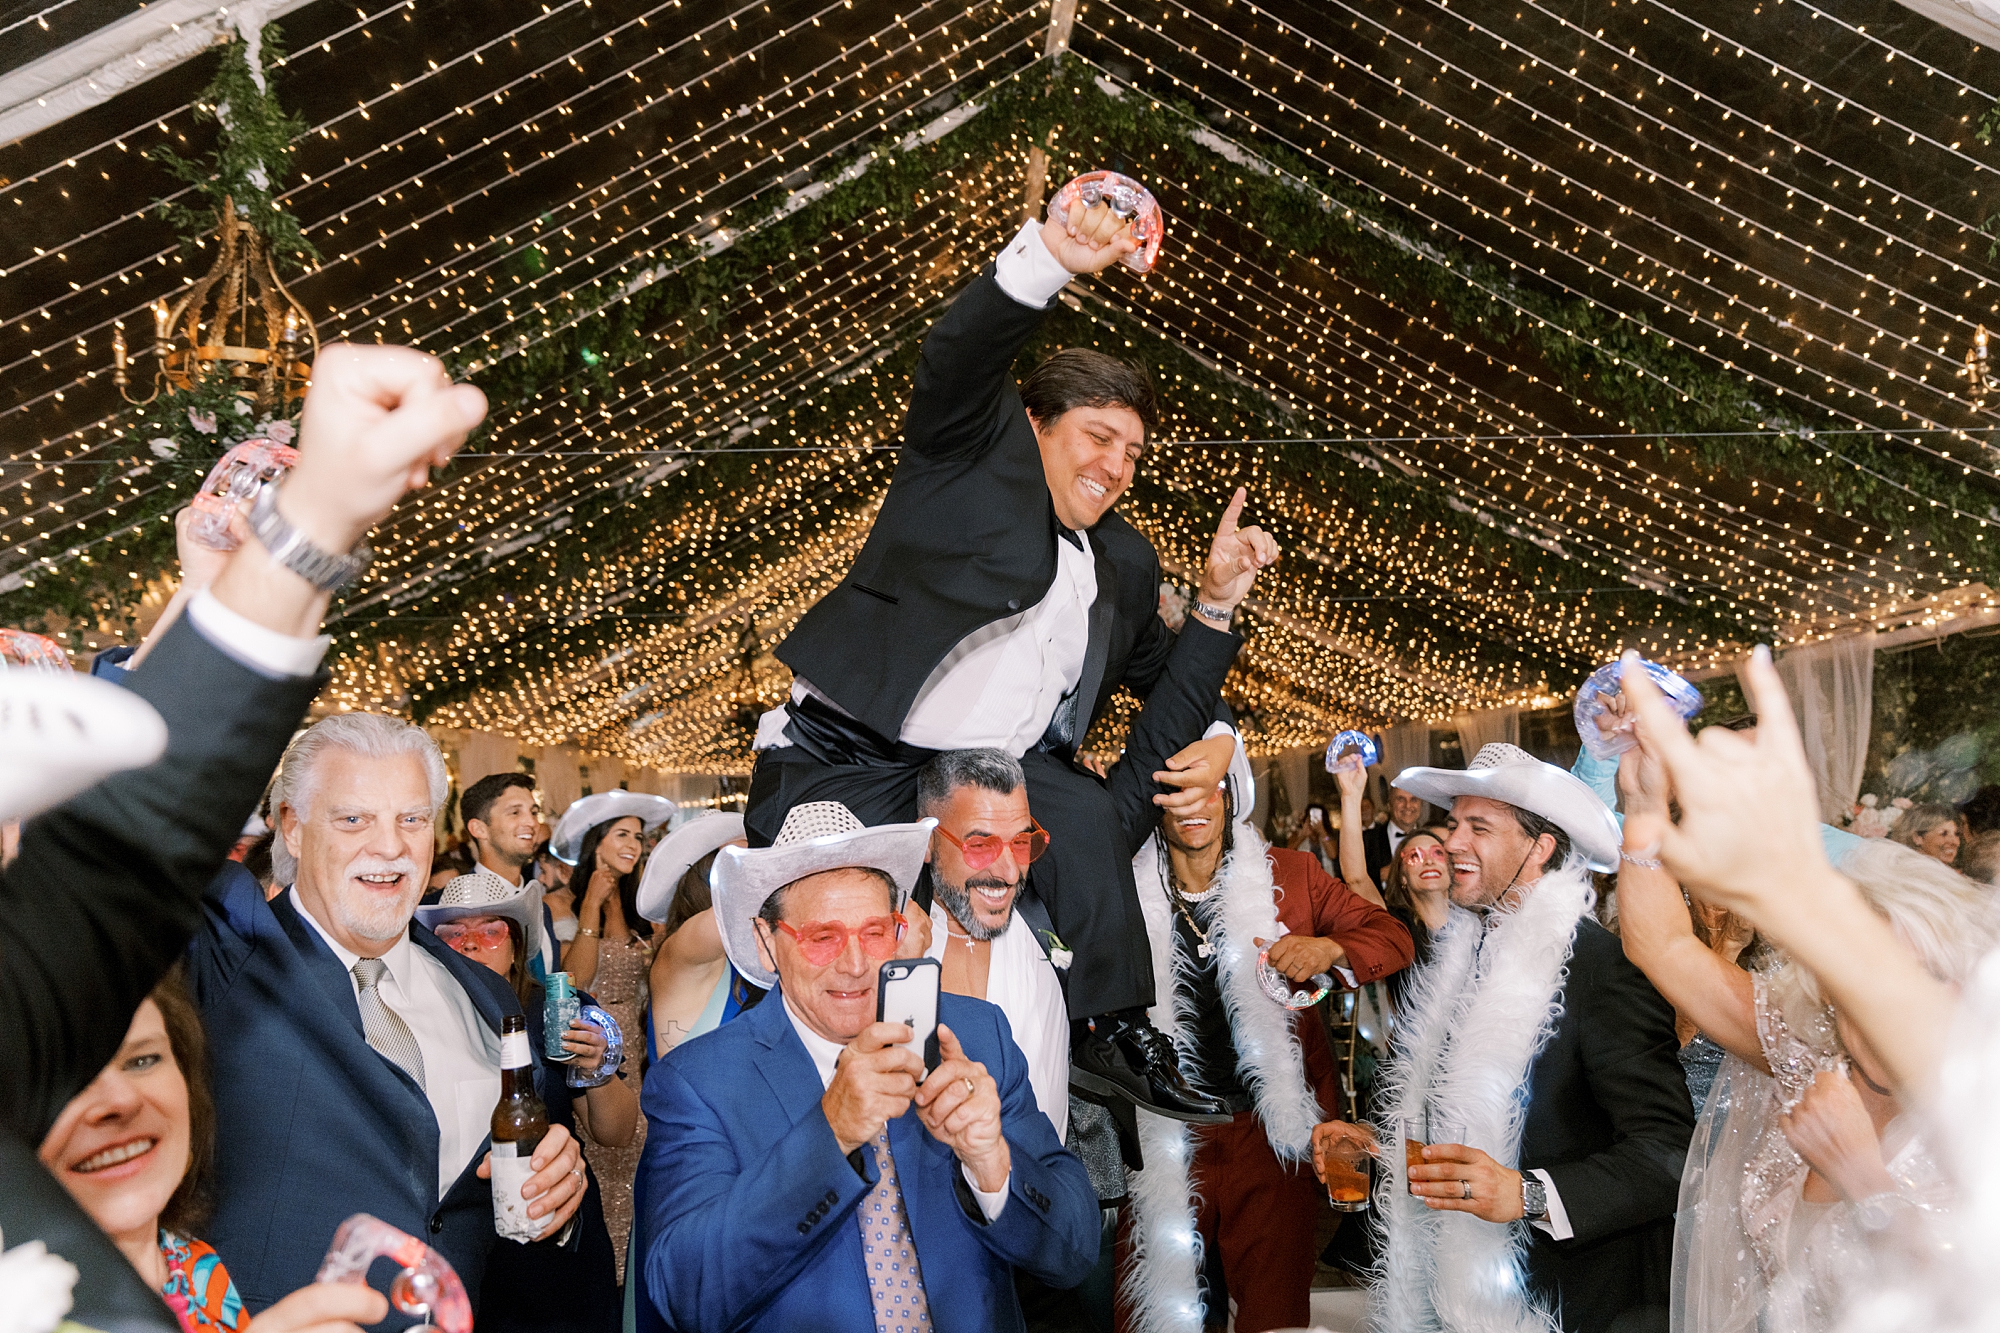 guests lift up groom during wedding reception under tent